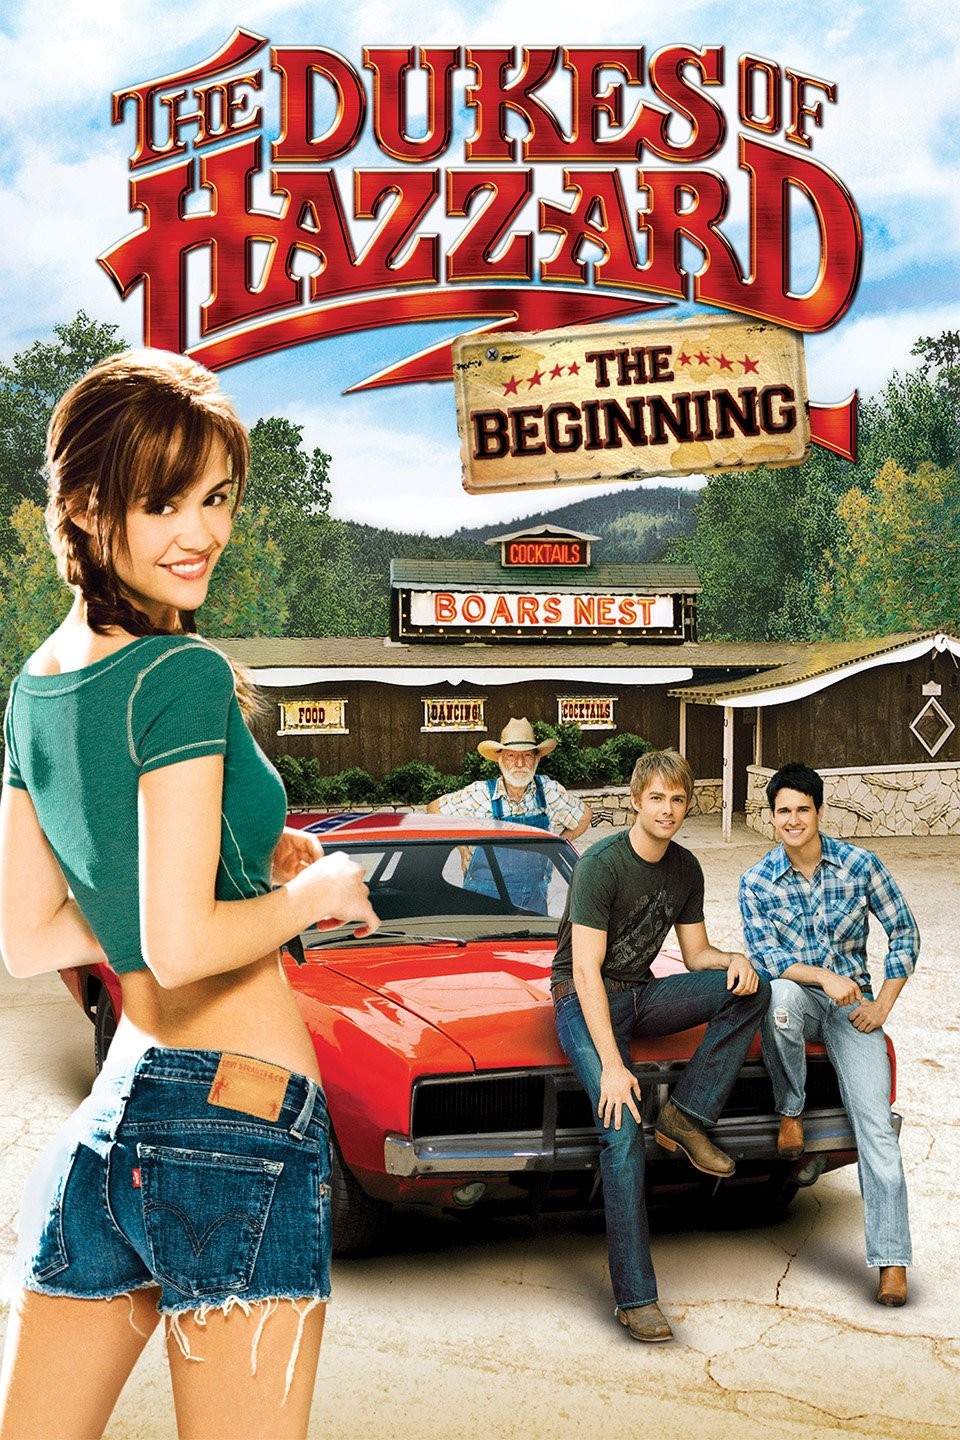 The Dukes of Hazzard (2005) Movie Information & Trailers